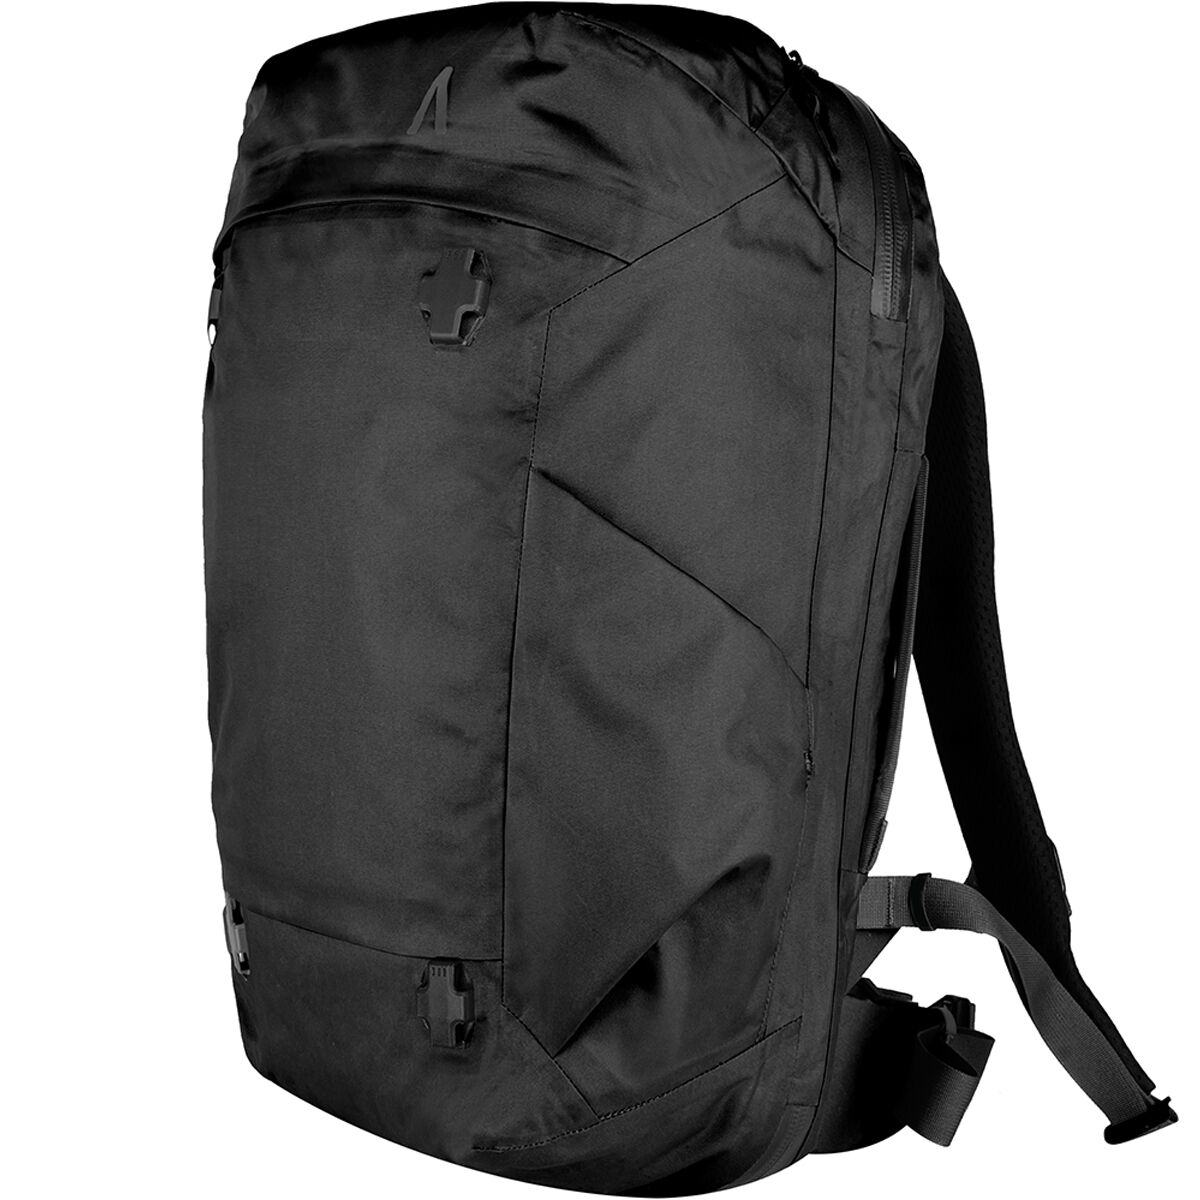 Boundary Supply Arris 35L Pack